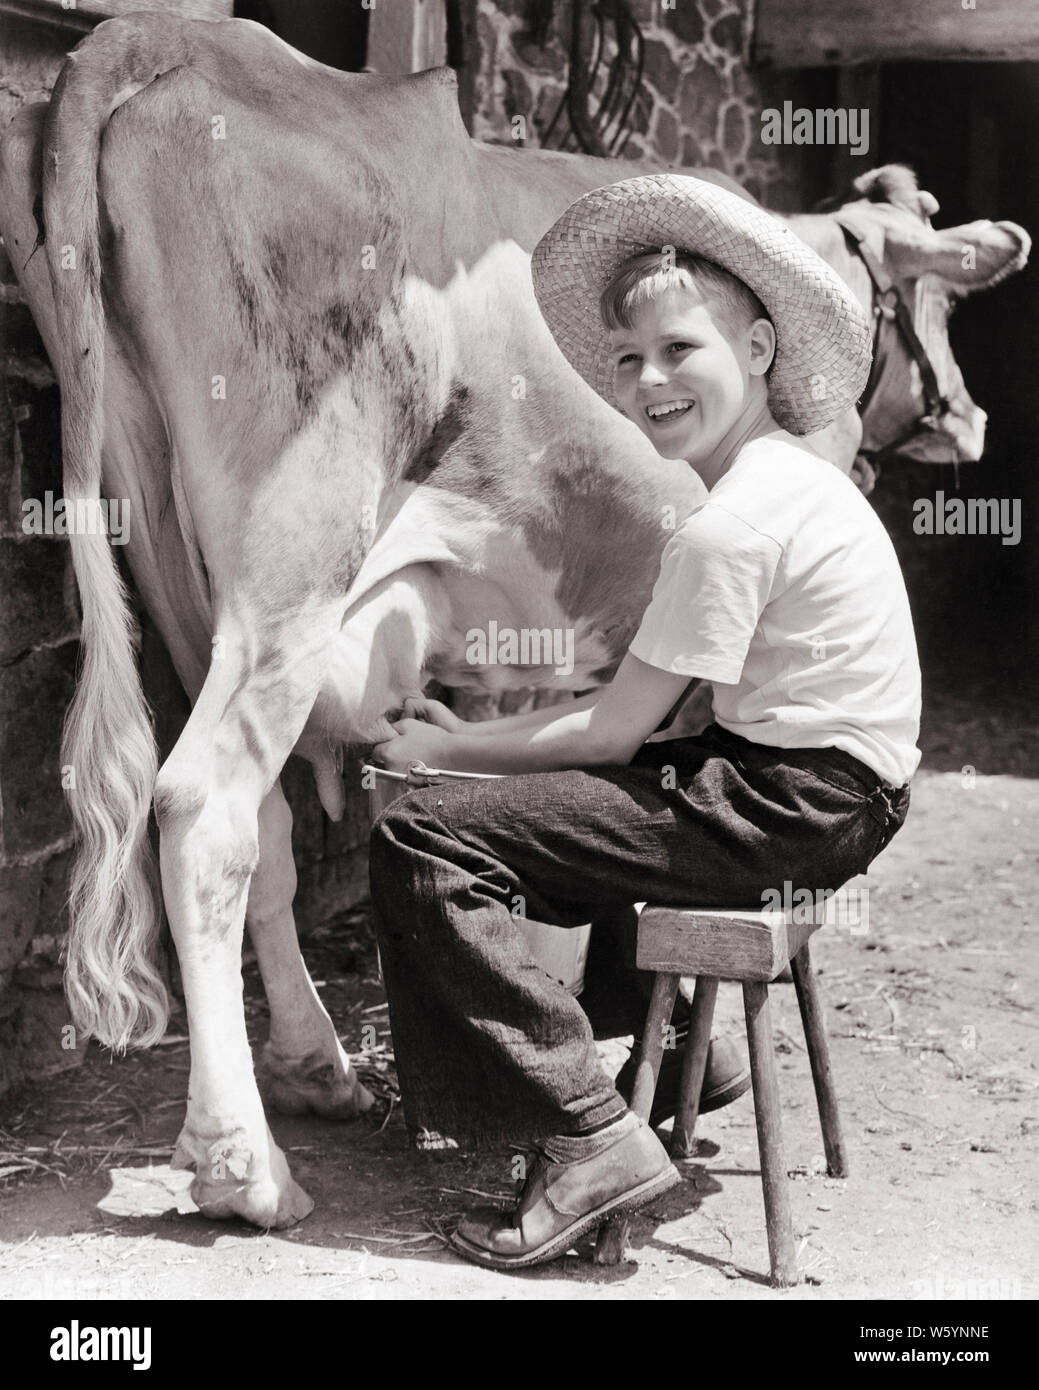 1940s SMILING BLONDE BOY SITTING ON STOOL WEARING STRAW HAT MILKING A COW - d1173 HAR001 HARS HALF-LENGTH COW FARMING MALES CONFIDENCE AGRICULTURE B&W GOALS HAPPINESS CHEERFUL CHORE MILKING FARMERS PRIDE SMILES DAIRYING CONNECTION JOYFUL COOPERATION JUVENILES PRE-TEEN PRE-TEEN BOY TASK BLACK AND WHITE CAUCASIAN ETHNICITY HAR001 OLD FASHIONED Stock Photo